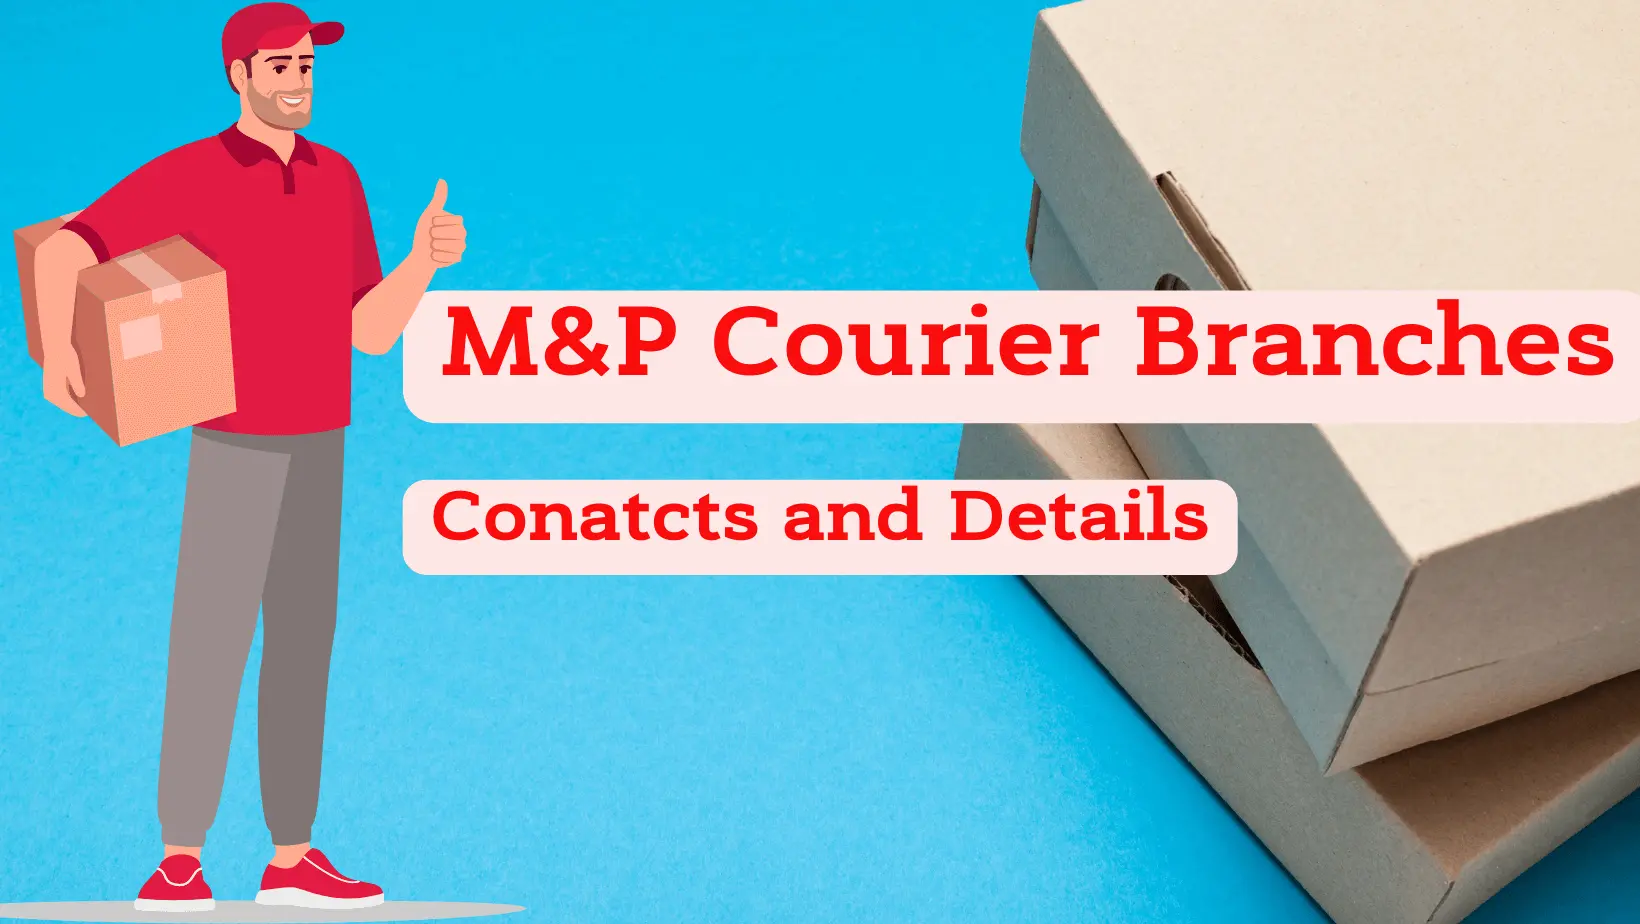 M&P Courier Branches Contacts and Details